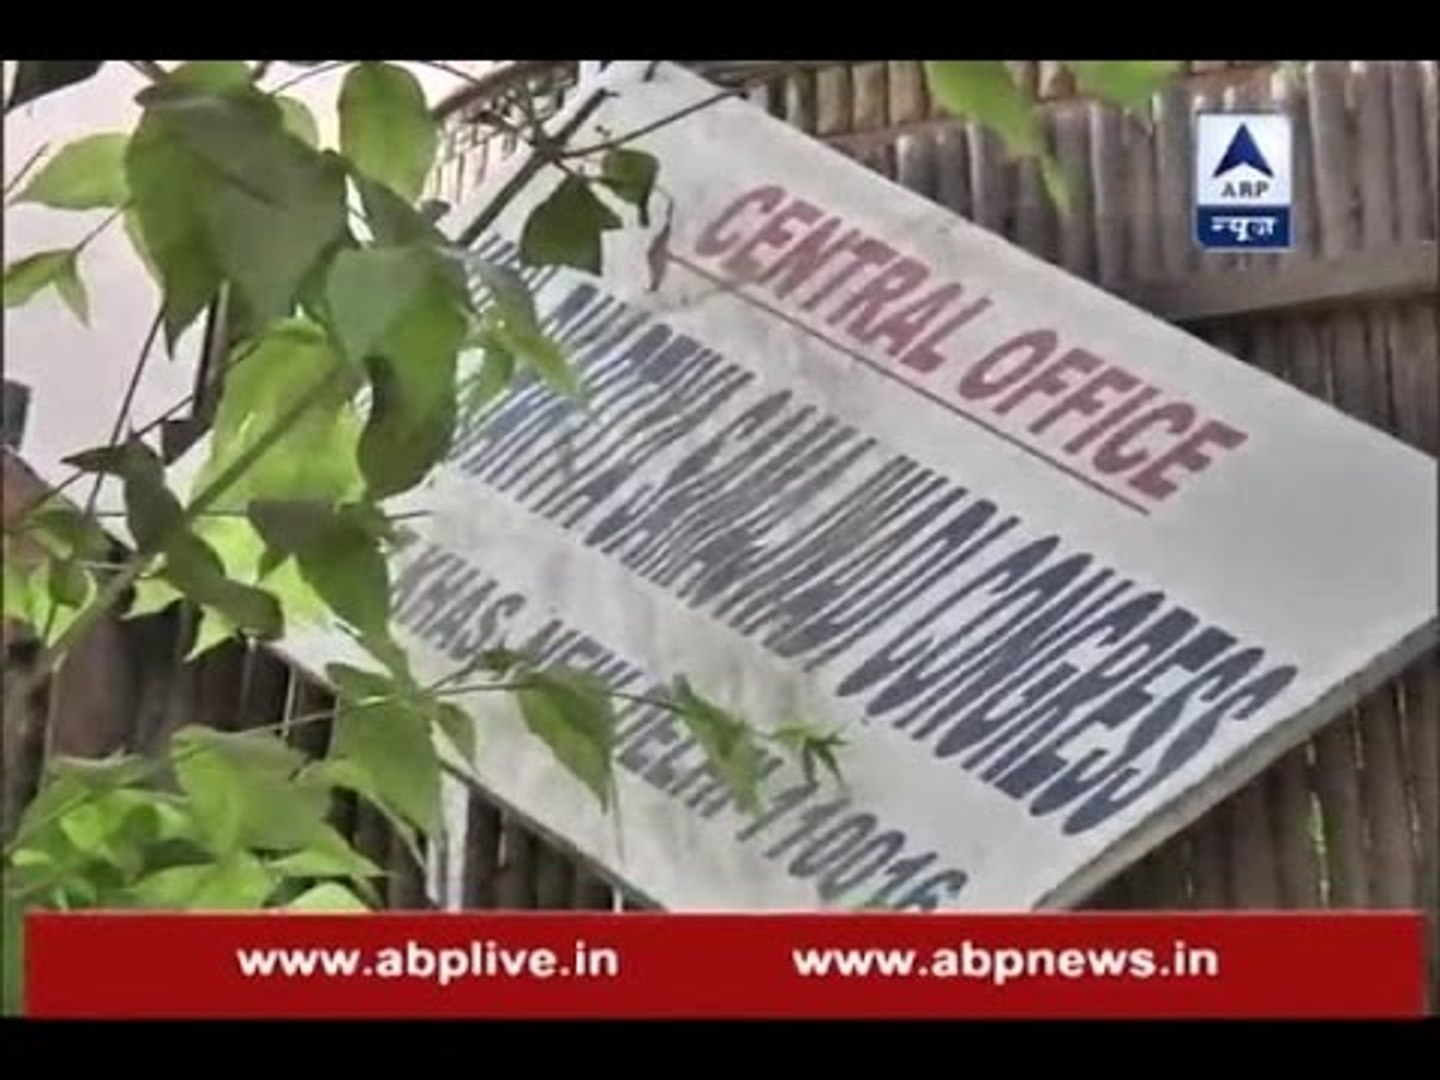 ABP News' INVESTIGATION on political parties existing only on papers